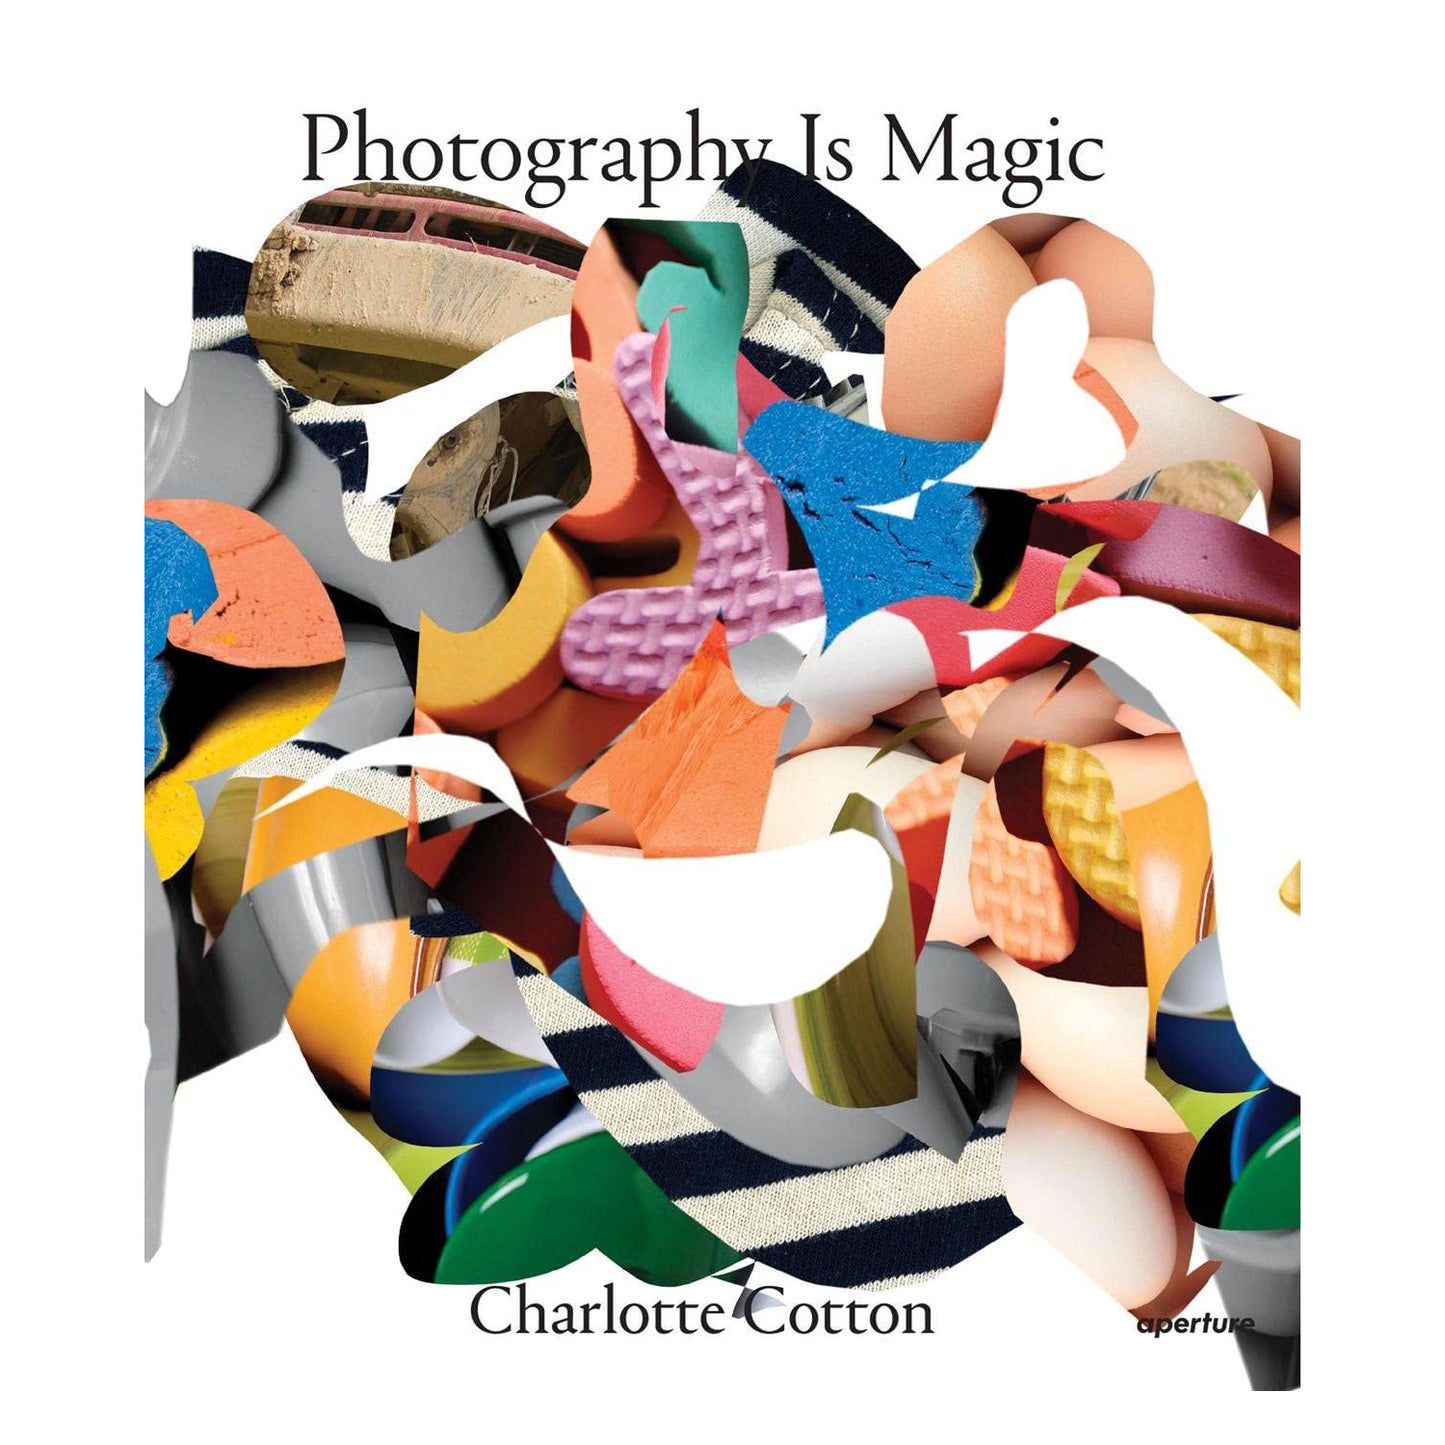 Photography is Magic by Charlotte Cotton